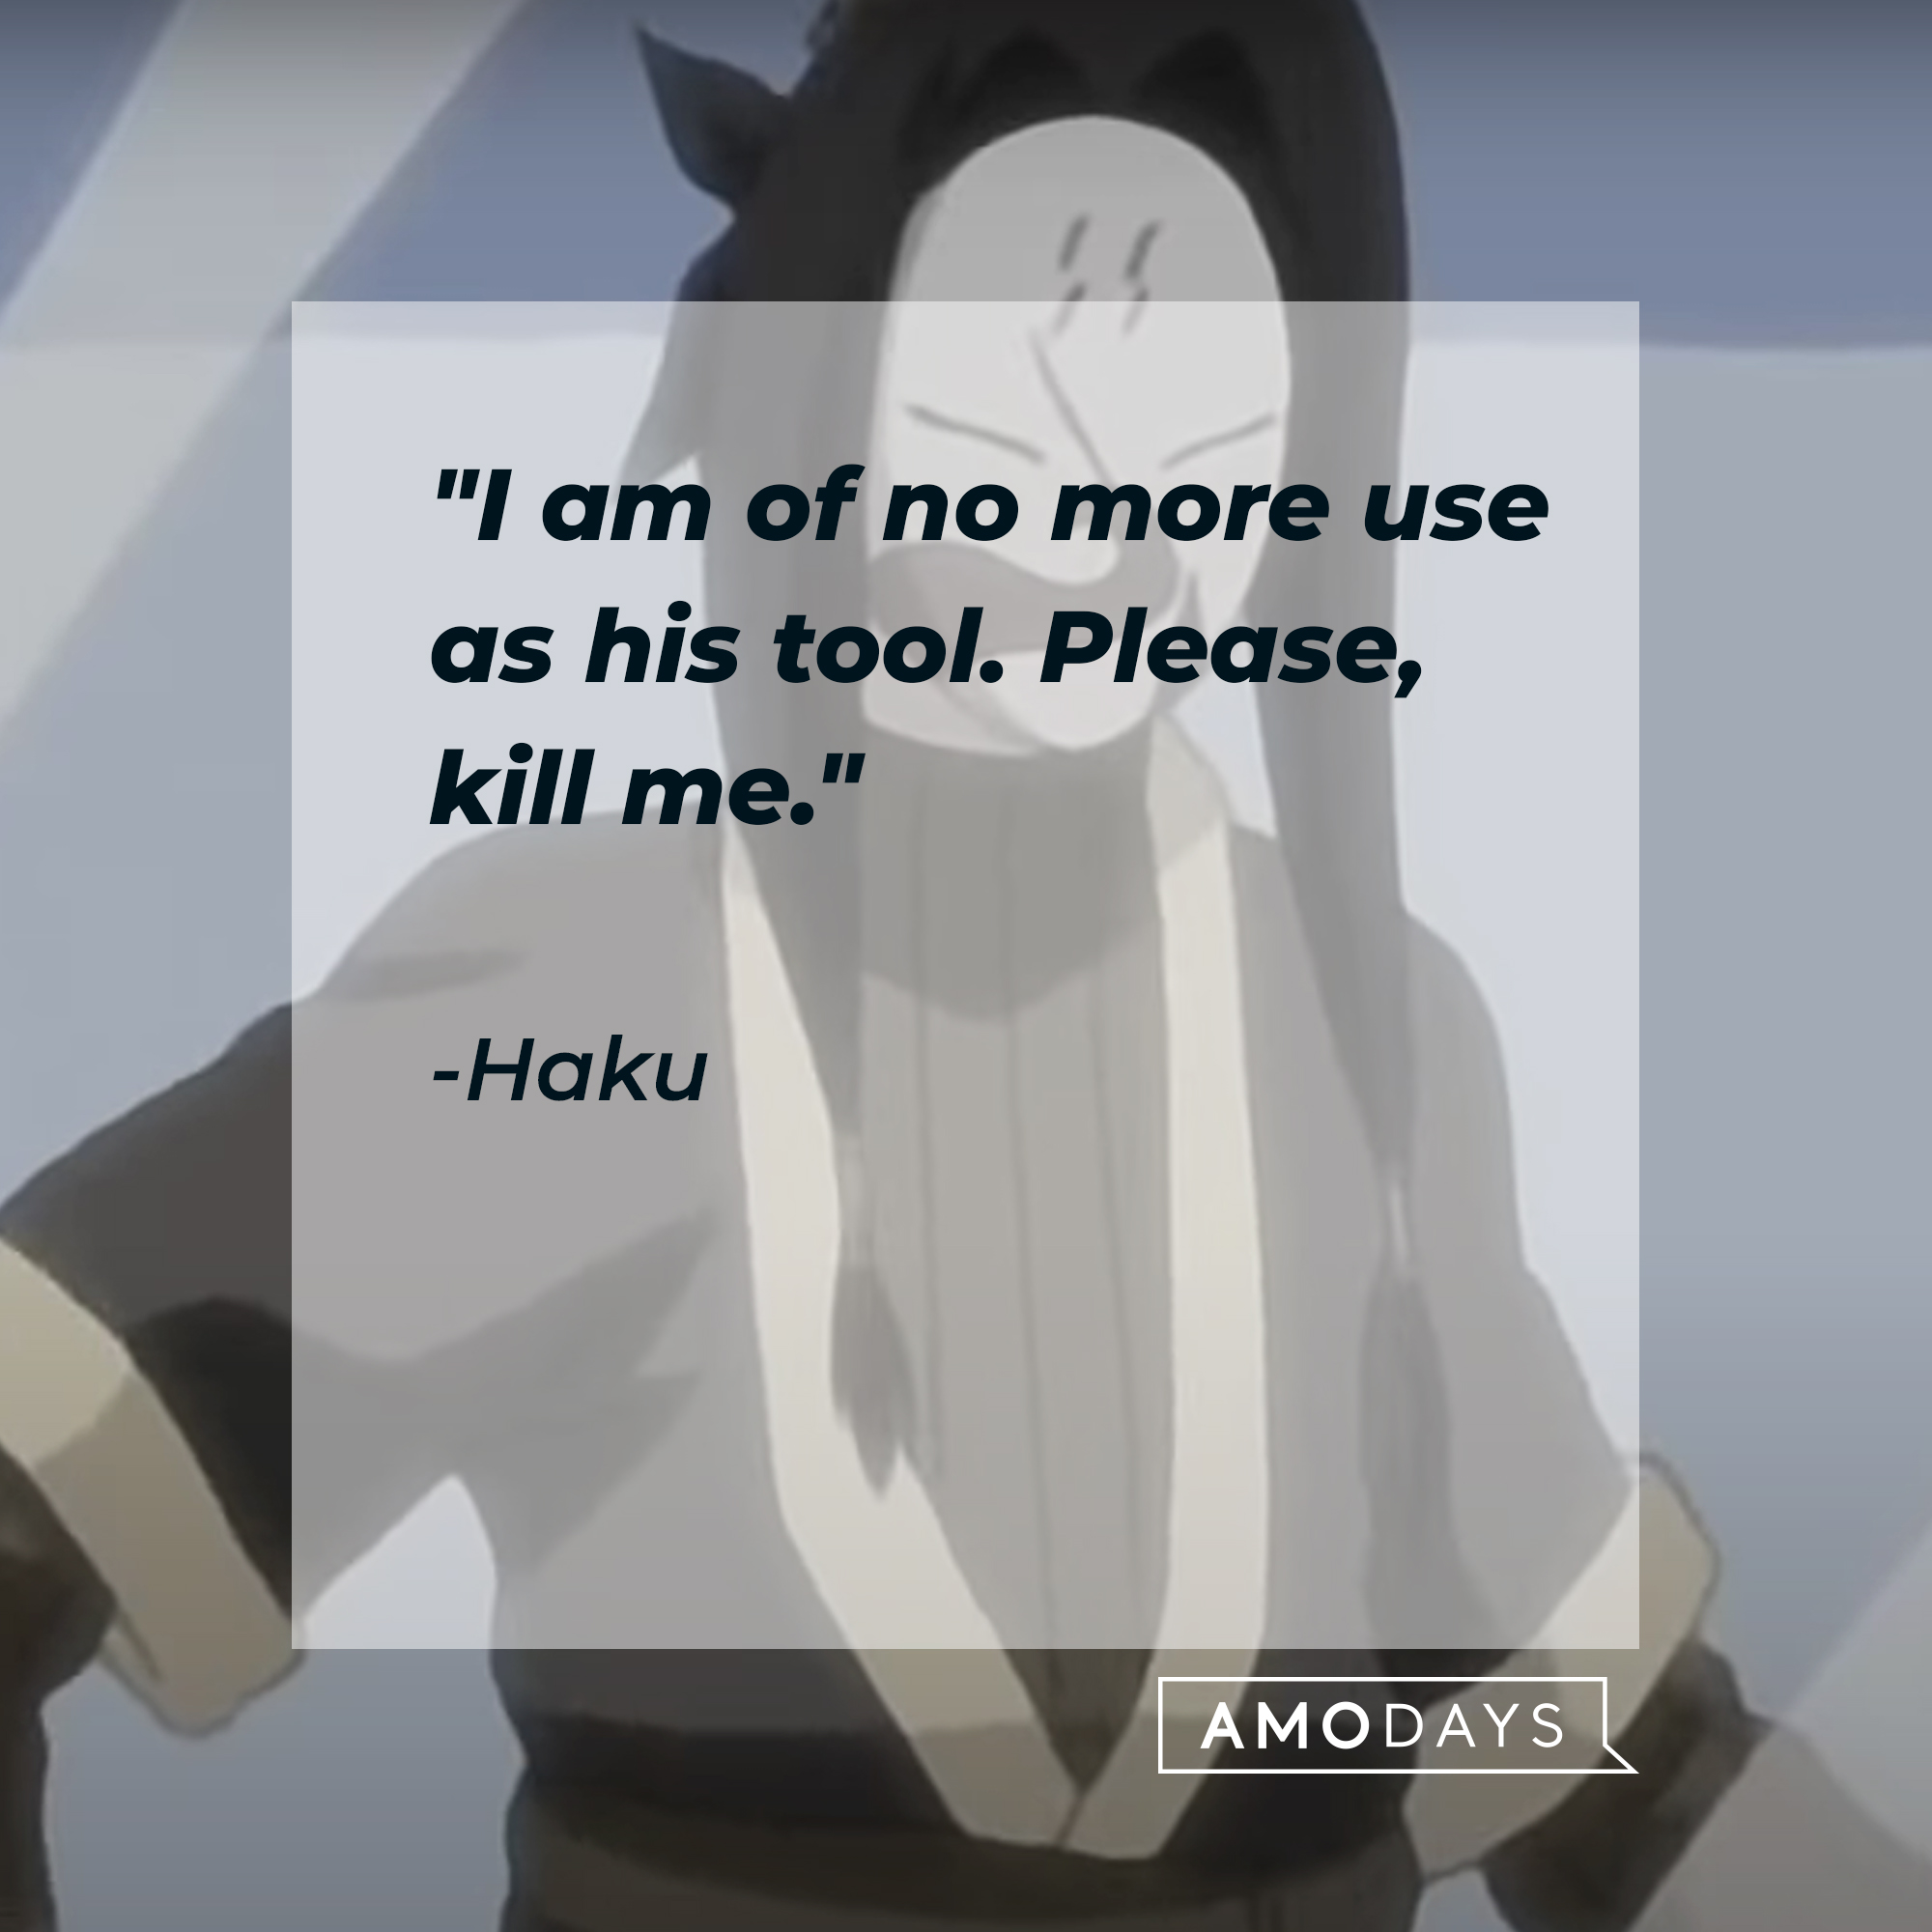 Haku, with his quote: “I am of no more use as his tool. Please, kill me.” | Source: facebook.com/narutoofficialsns